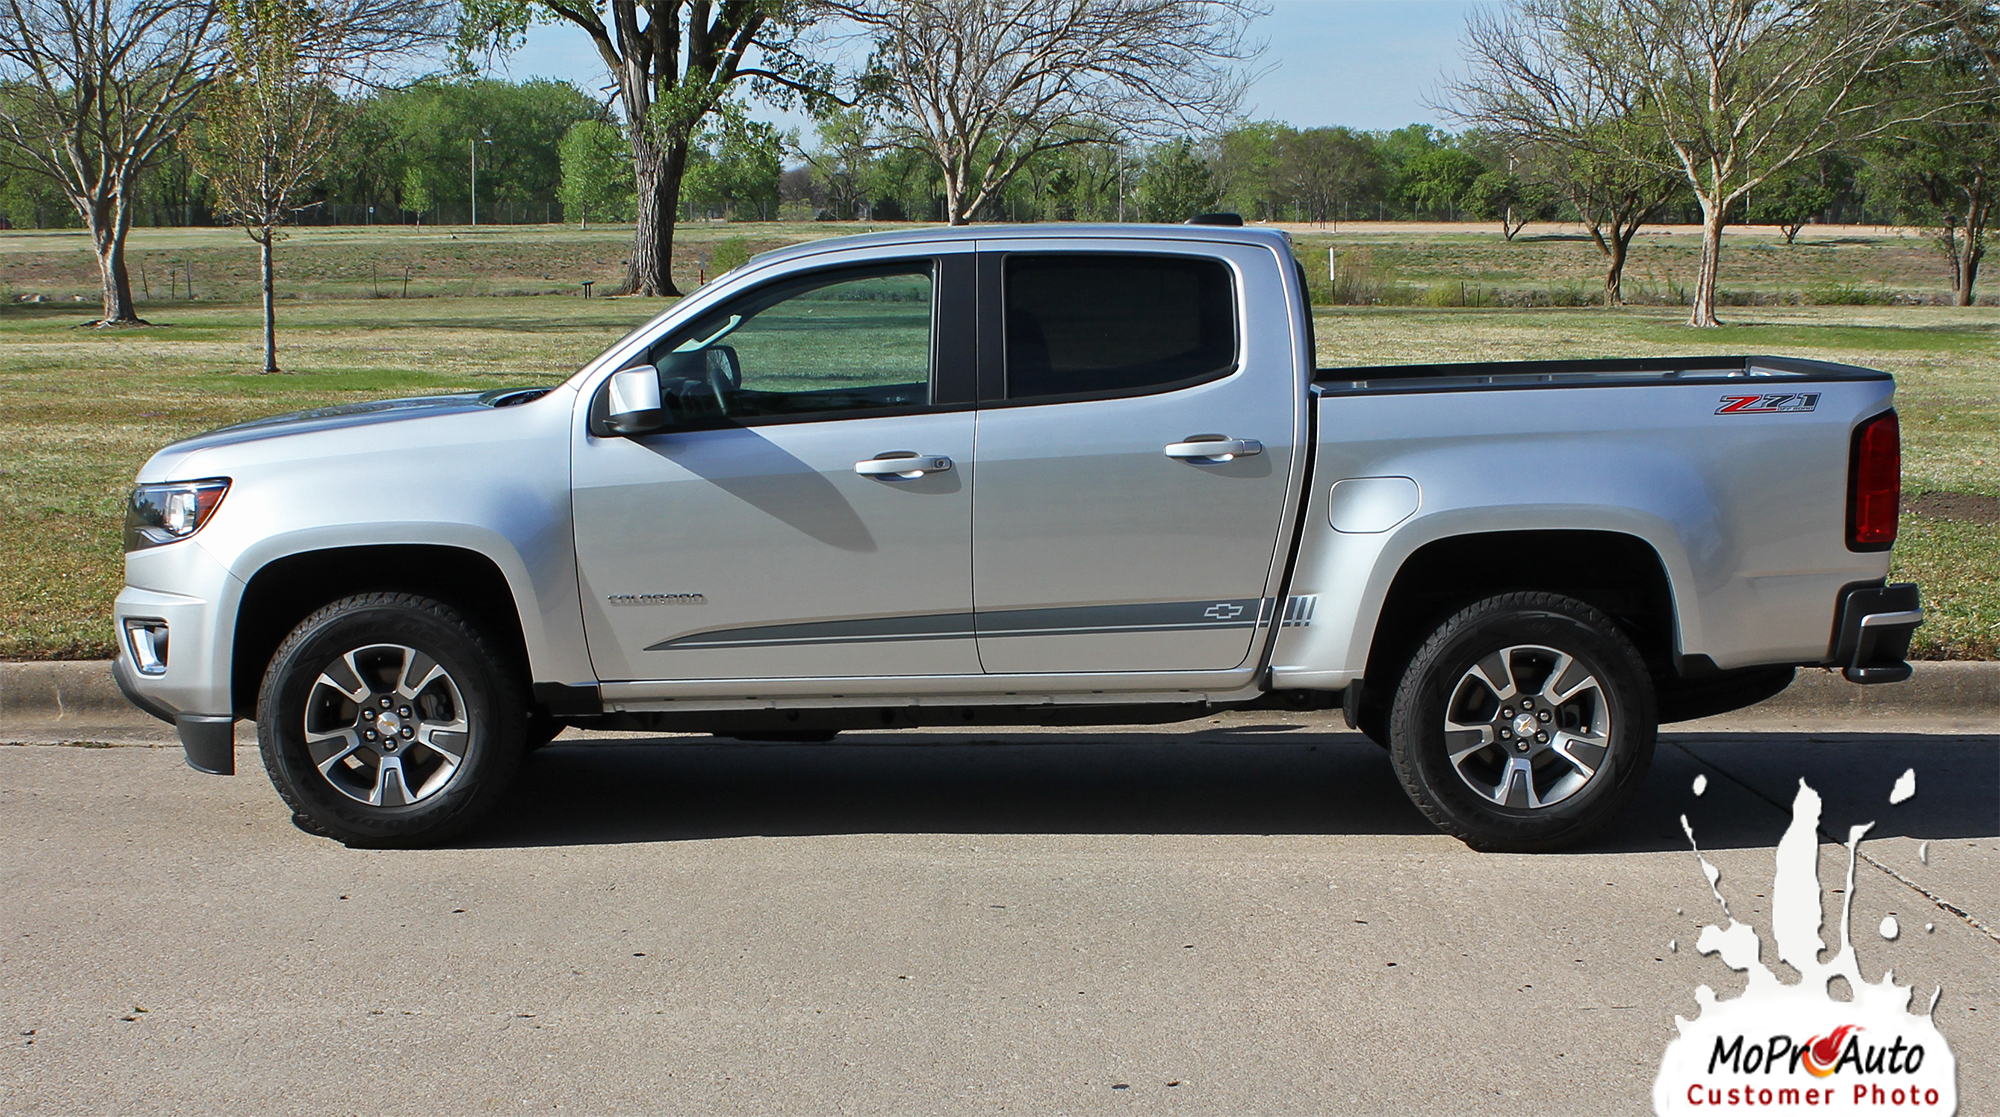 RANTON - Chevy Colorado Vinyl Graphics, Stripes and Decals Package by MoProAuto Pro Design Series